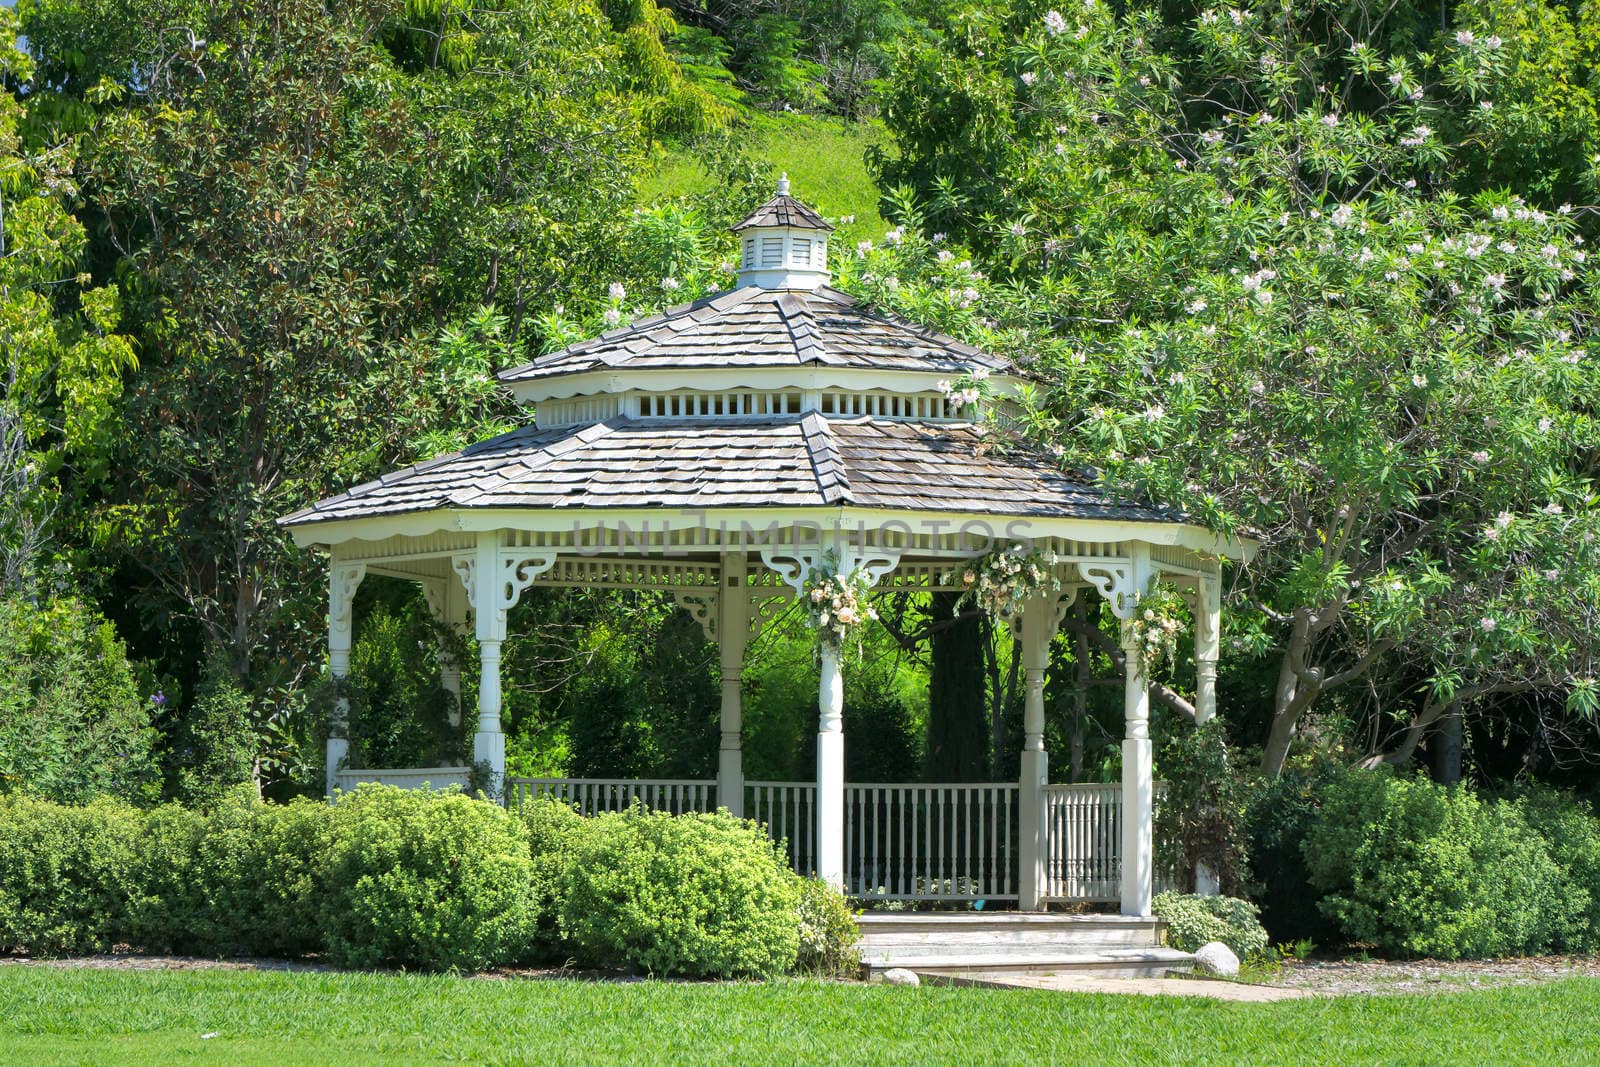 White ornate gazebo structure in green forest with lawn.